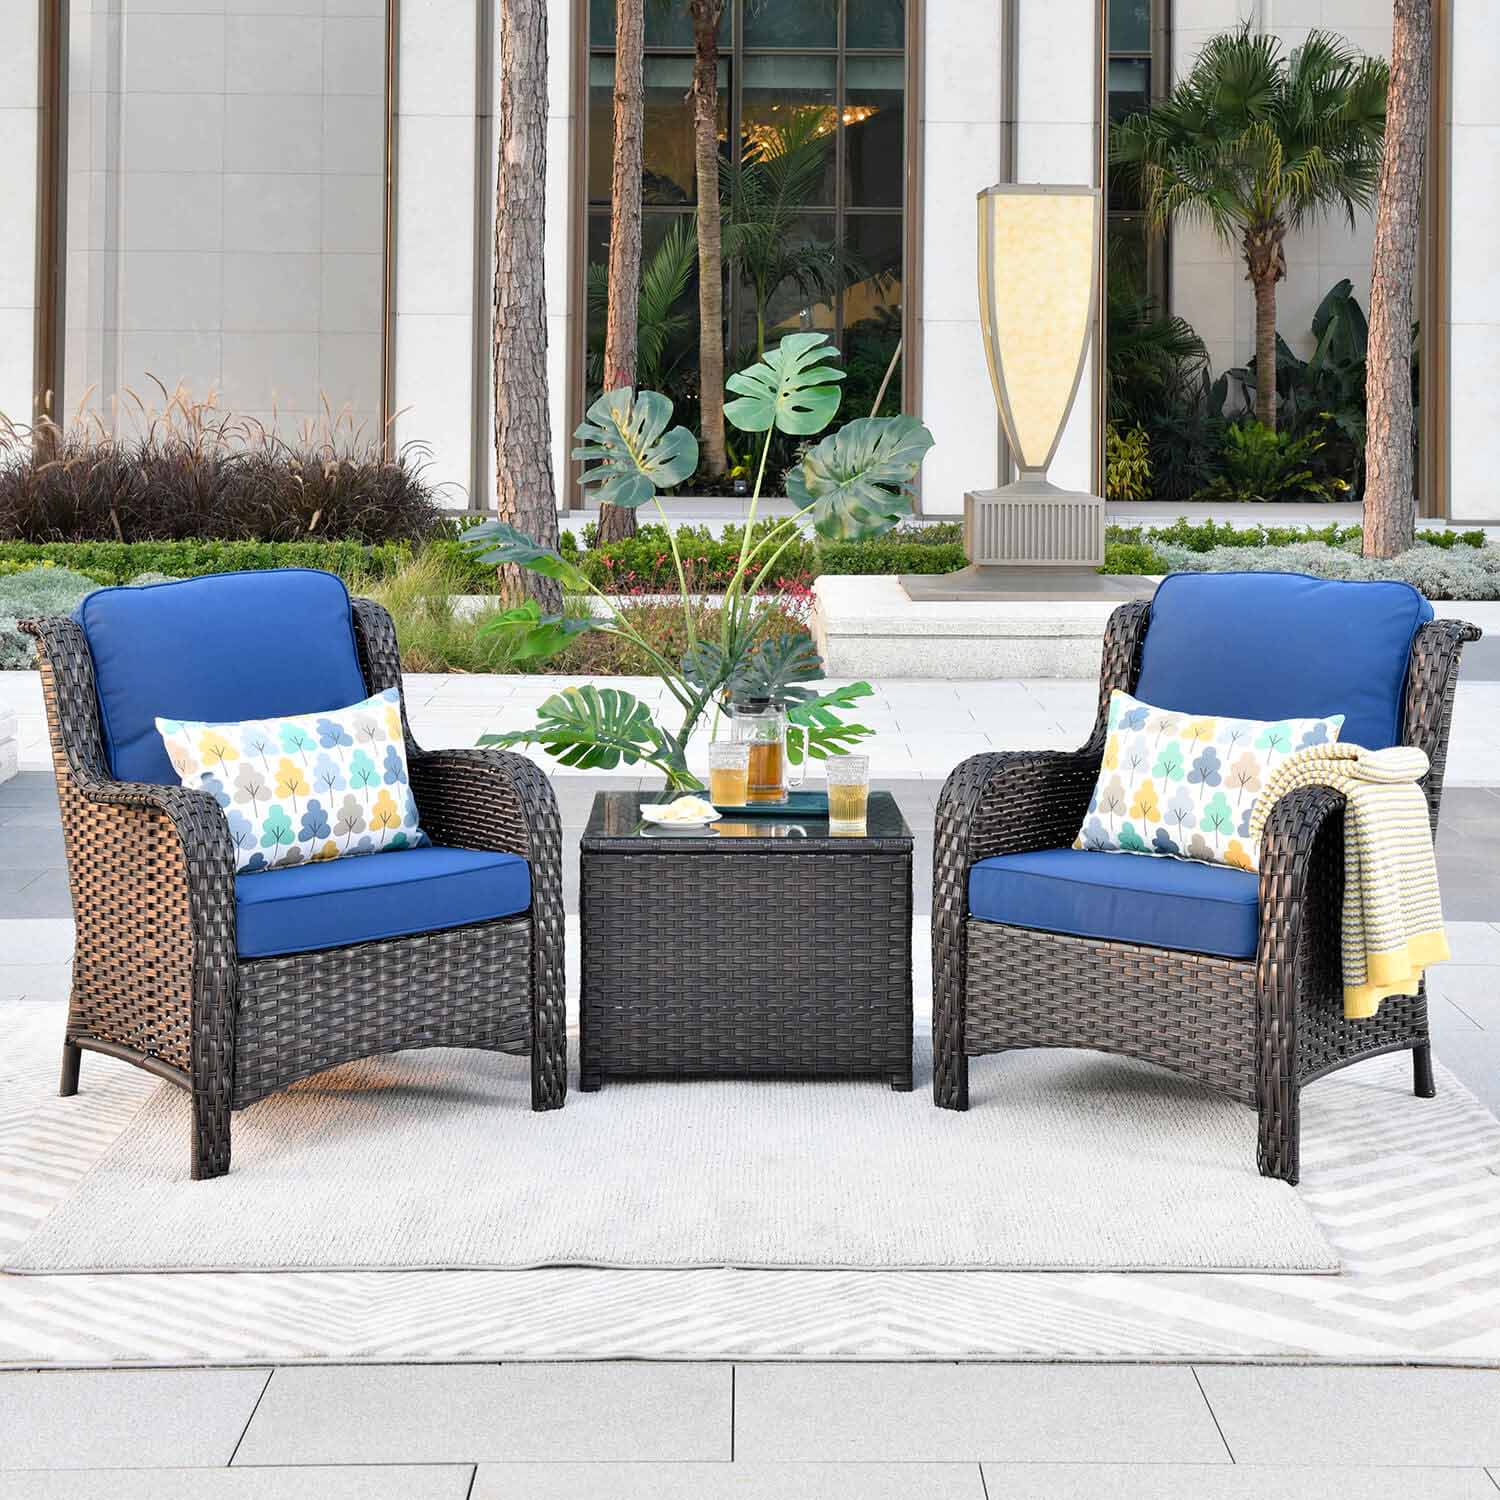 9 Stylish Ways to Incorporate a Patio Bistro Set into Your Outdoor Design